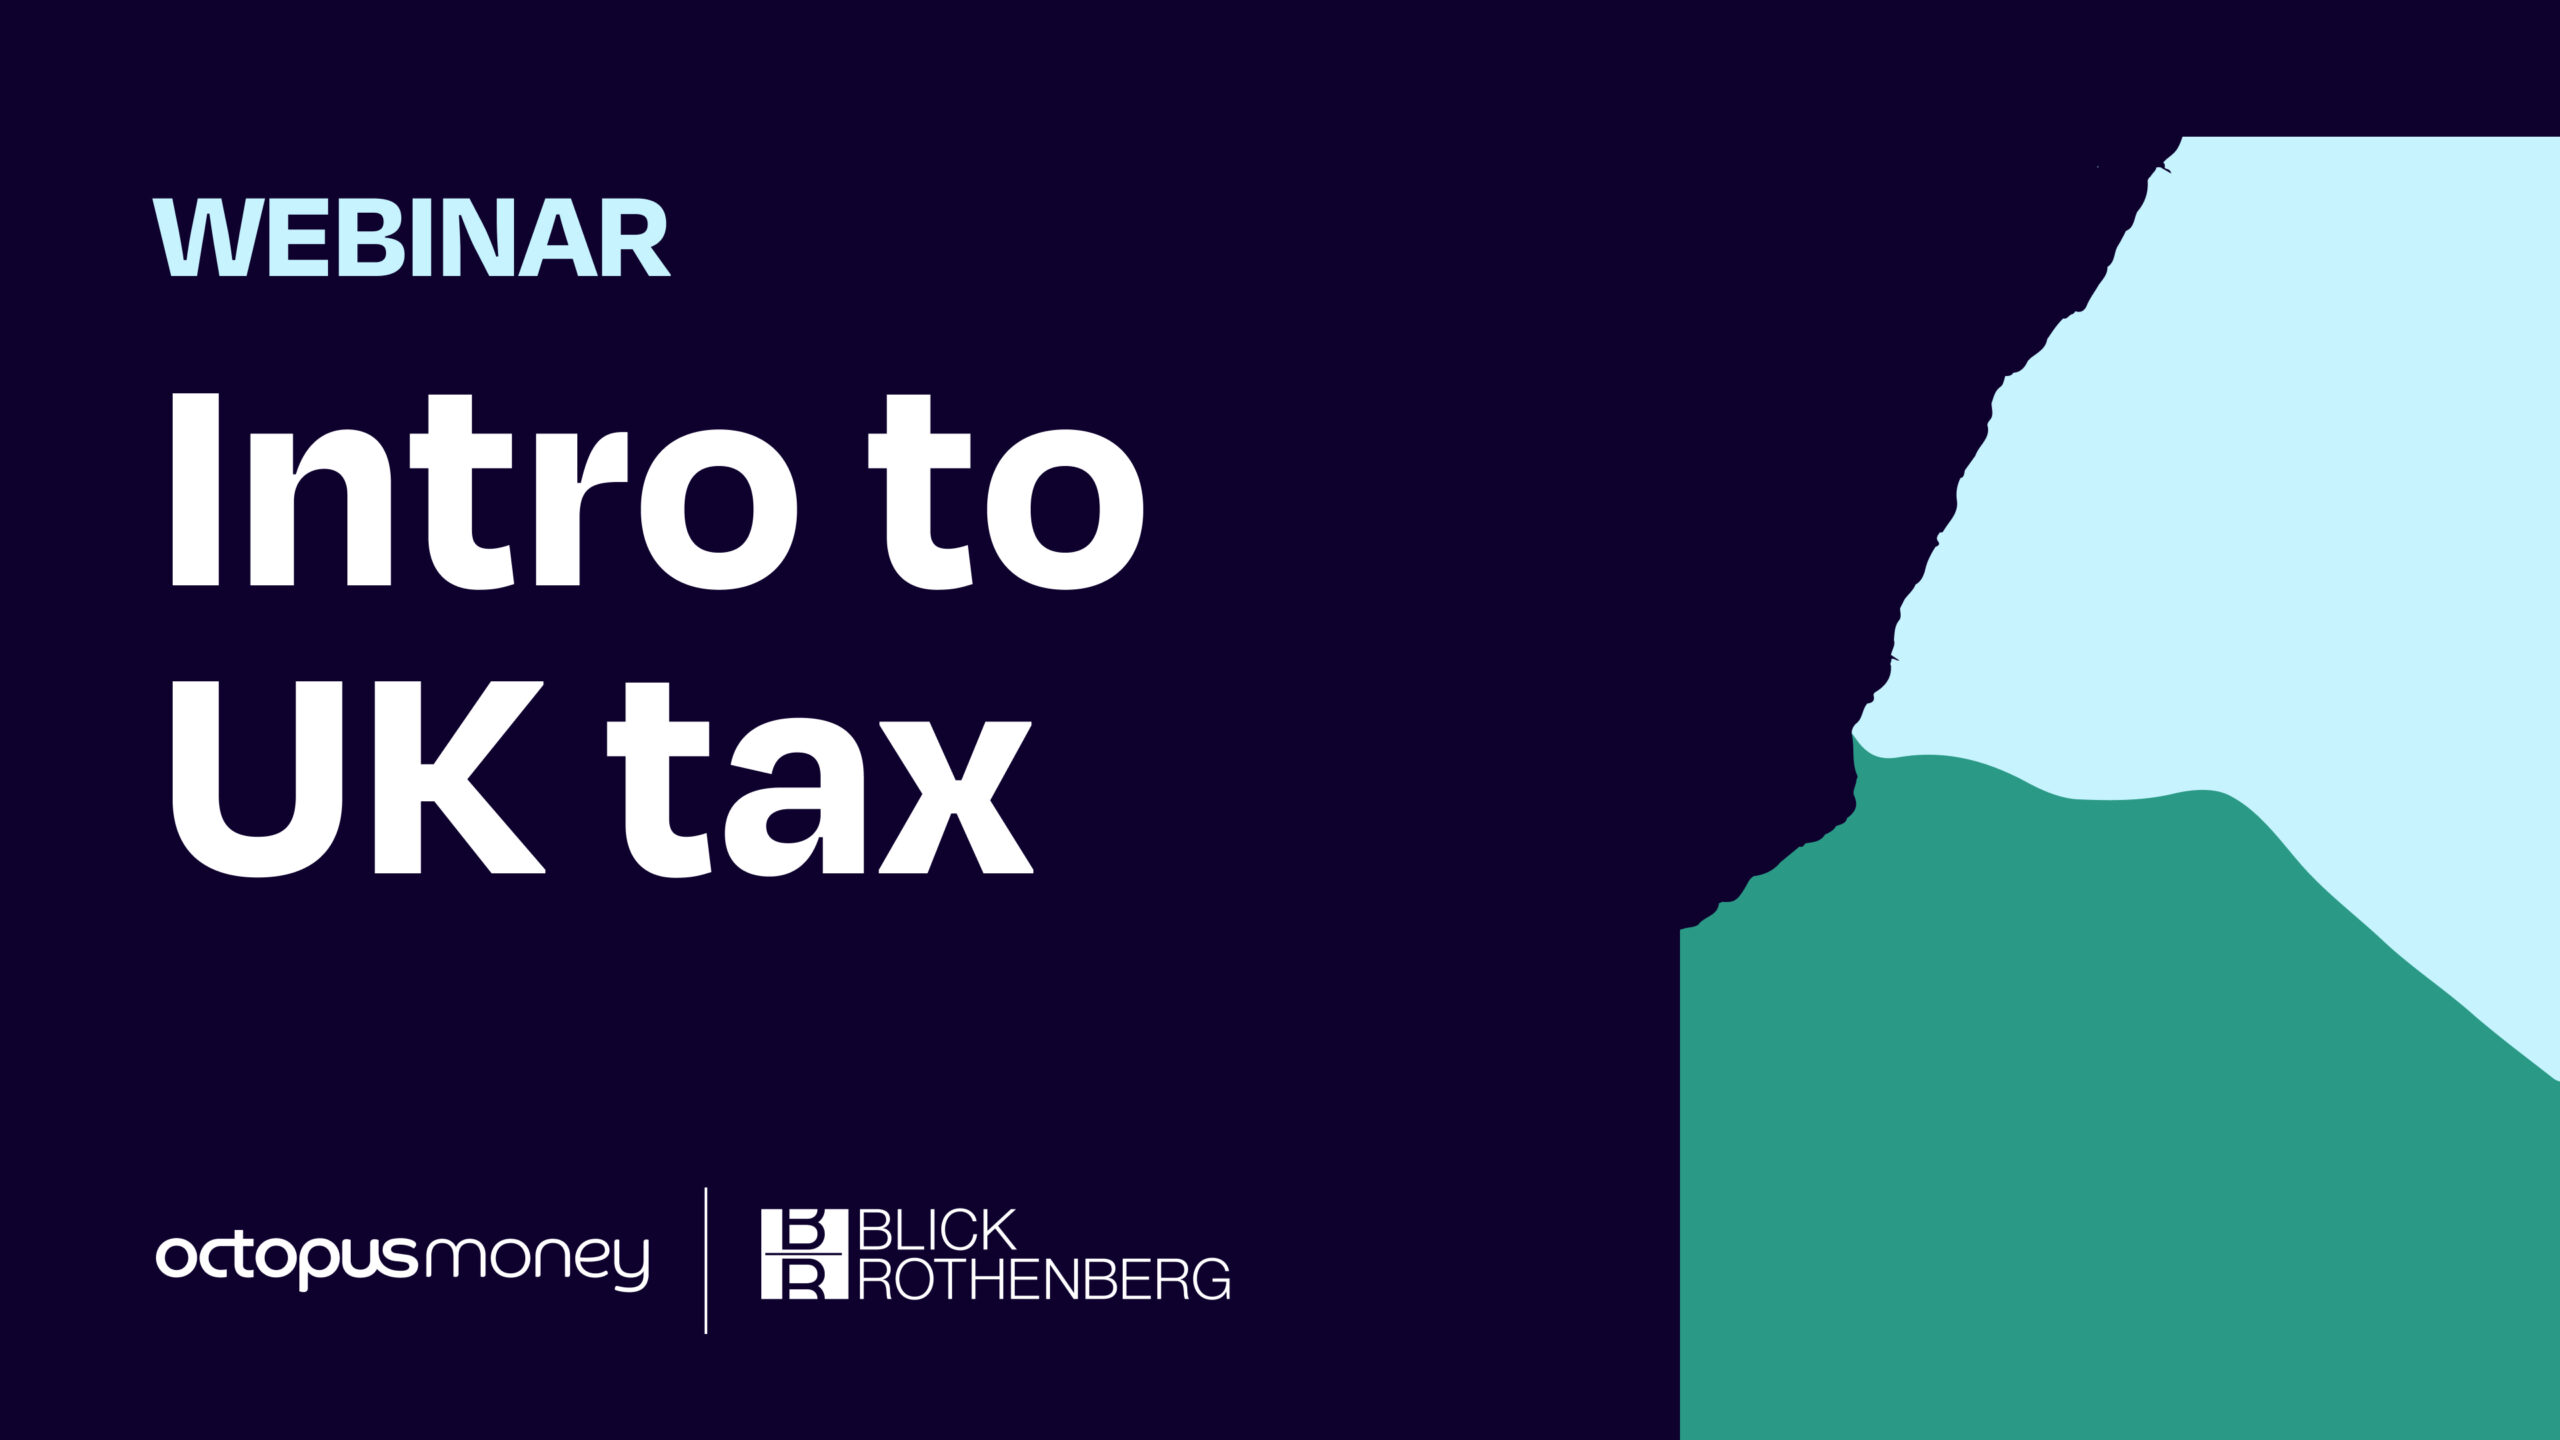 Intro to UK Tax (with Blick Rothenberg)